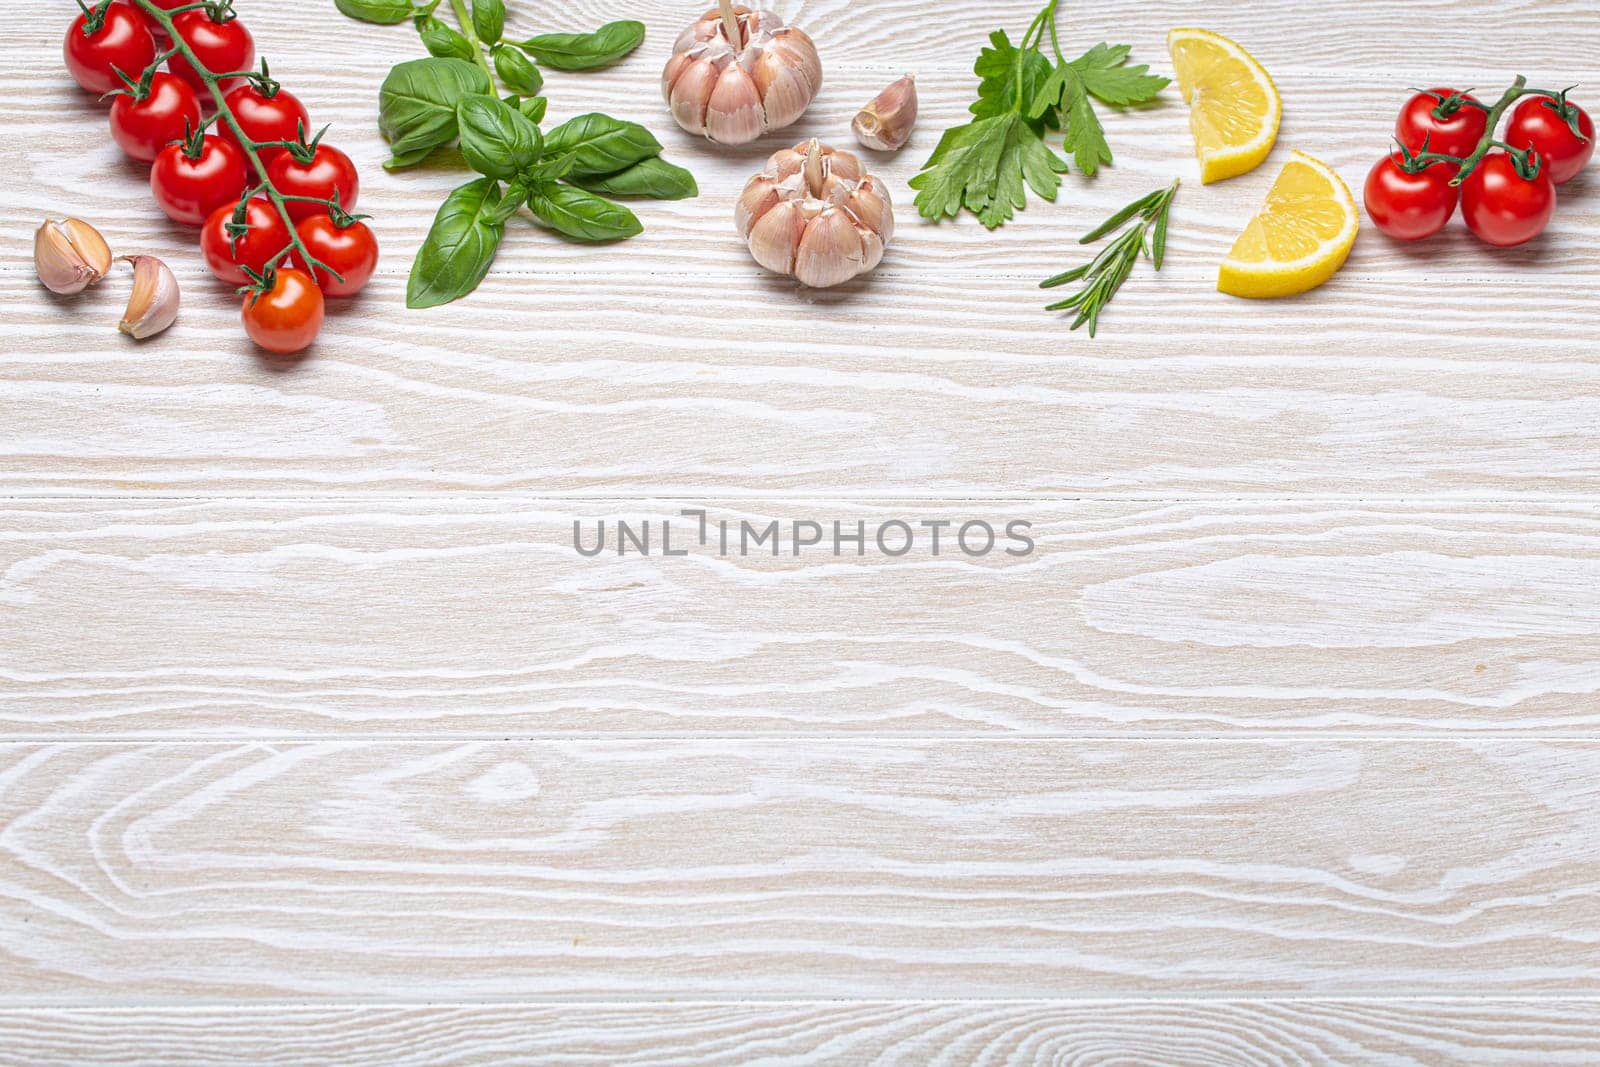 Healthy food ingredients composition with fresh cherry tomatoes, herbs, garlic cloves, lemon wedges on white wooden shabby background, overhead shot with copy space by its_al_dente